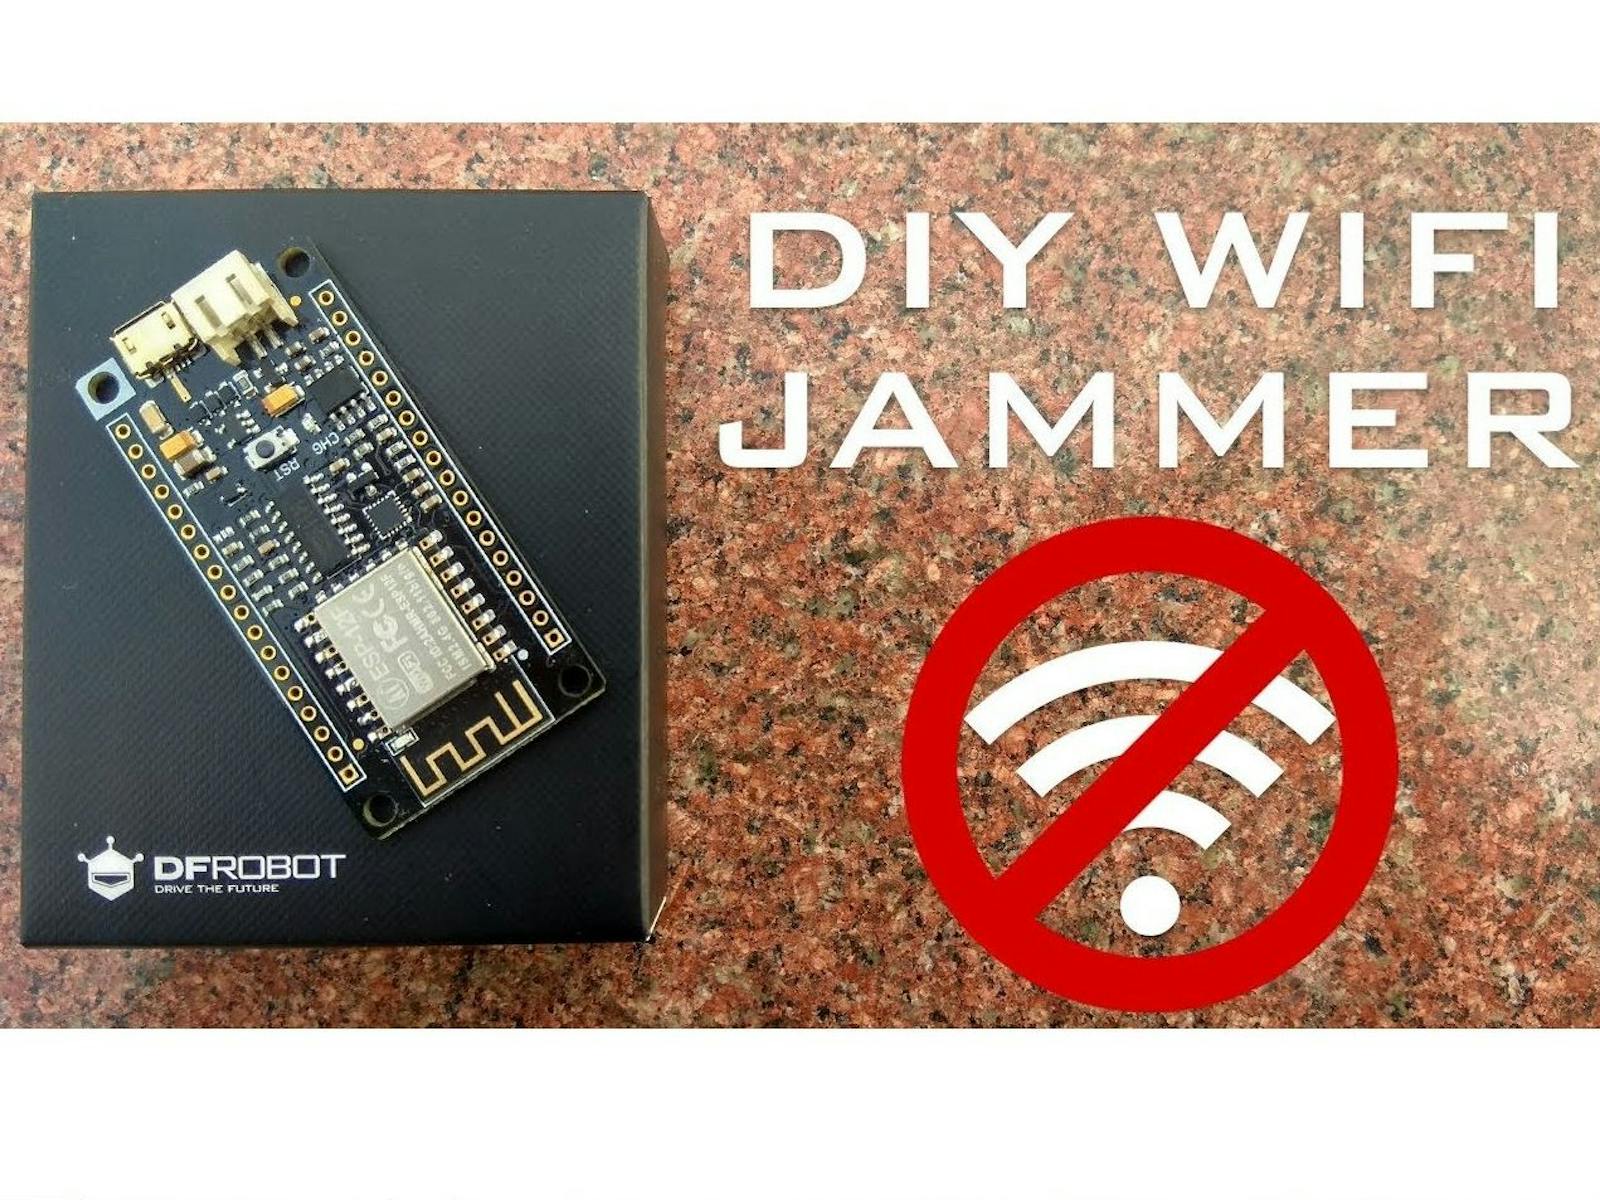 Wi-Fi Jammer from an ESP8266  WiFi Jammer/ Deauther 